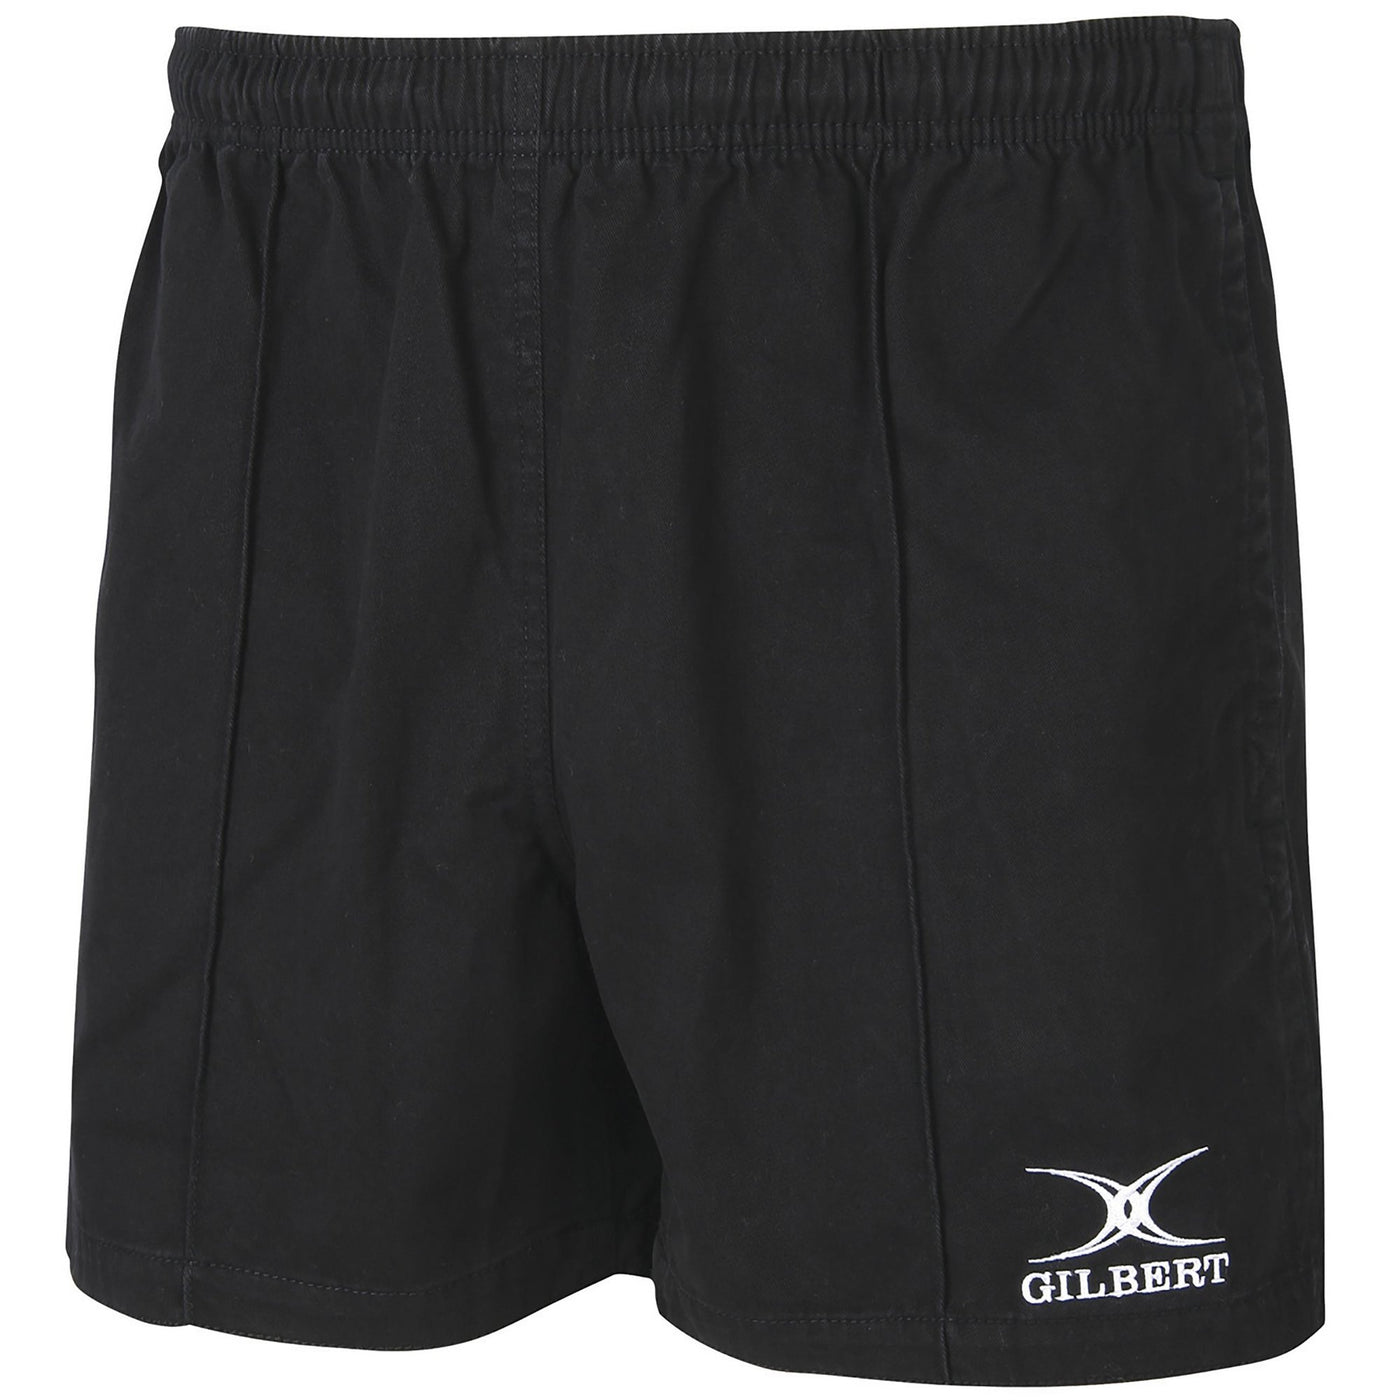 Kiwi Pro Rugby Short Black Junior (with pockets)